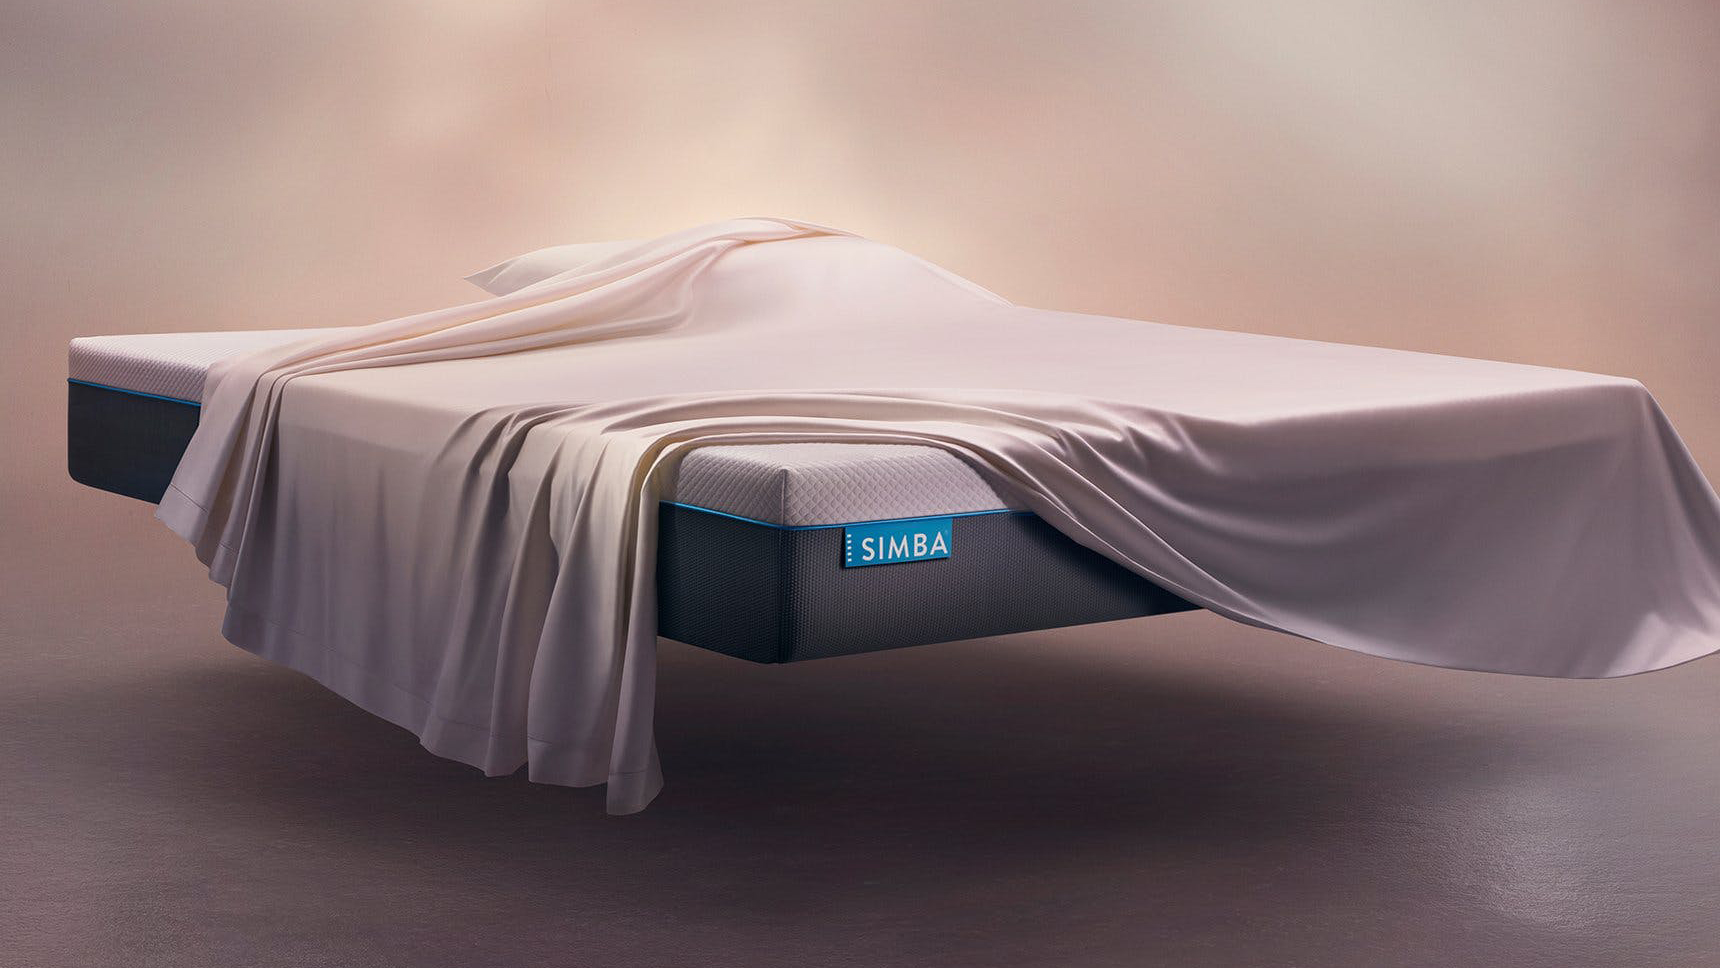 Simba Hybrid Mattress with a pillow and sheet over the bed